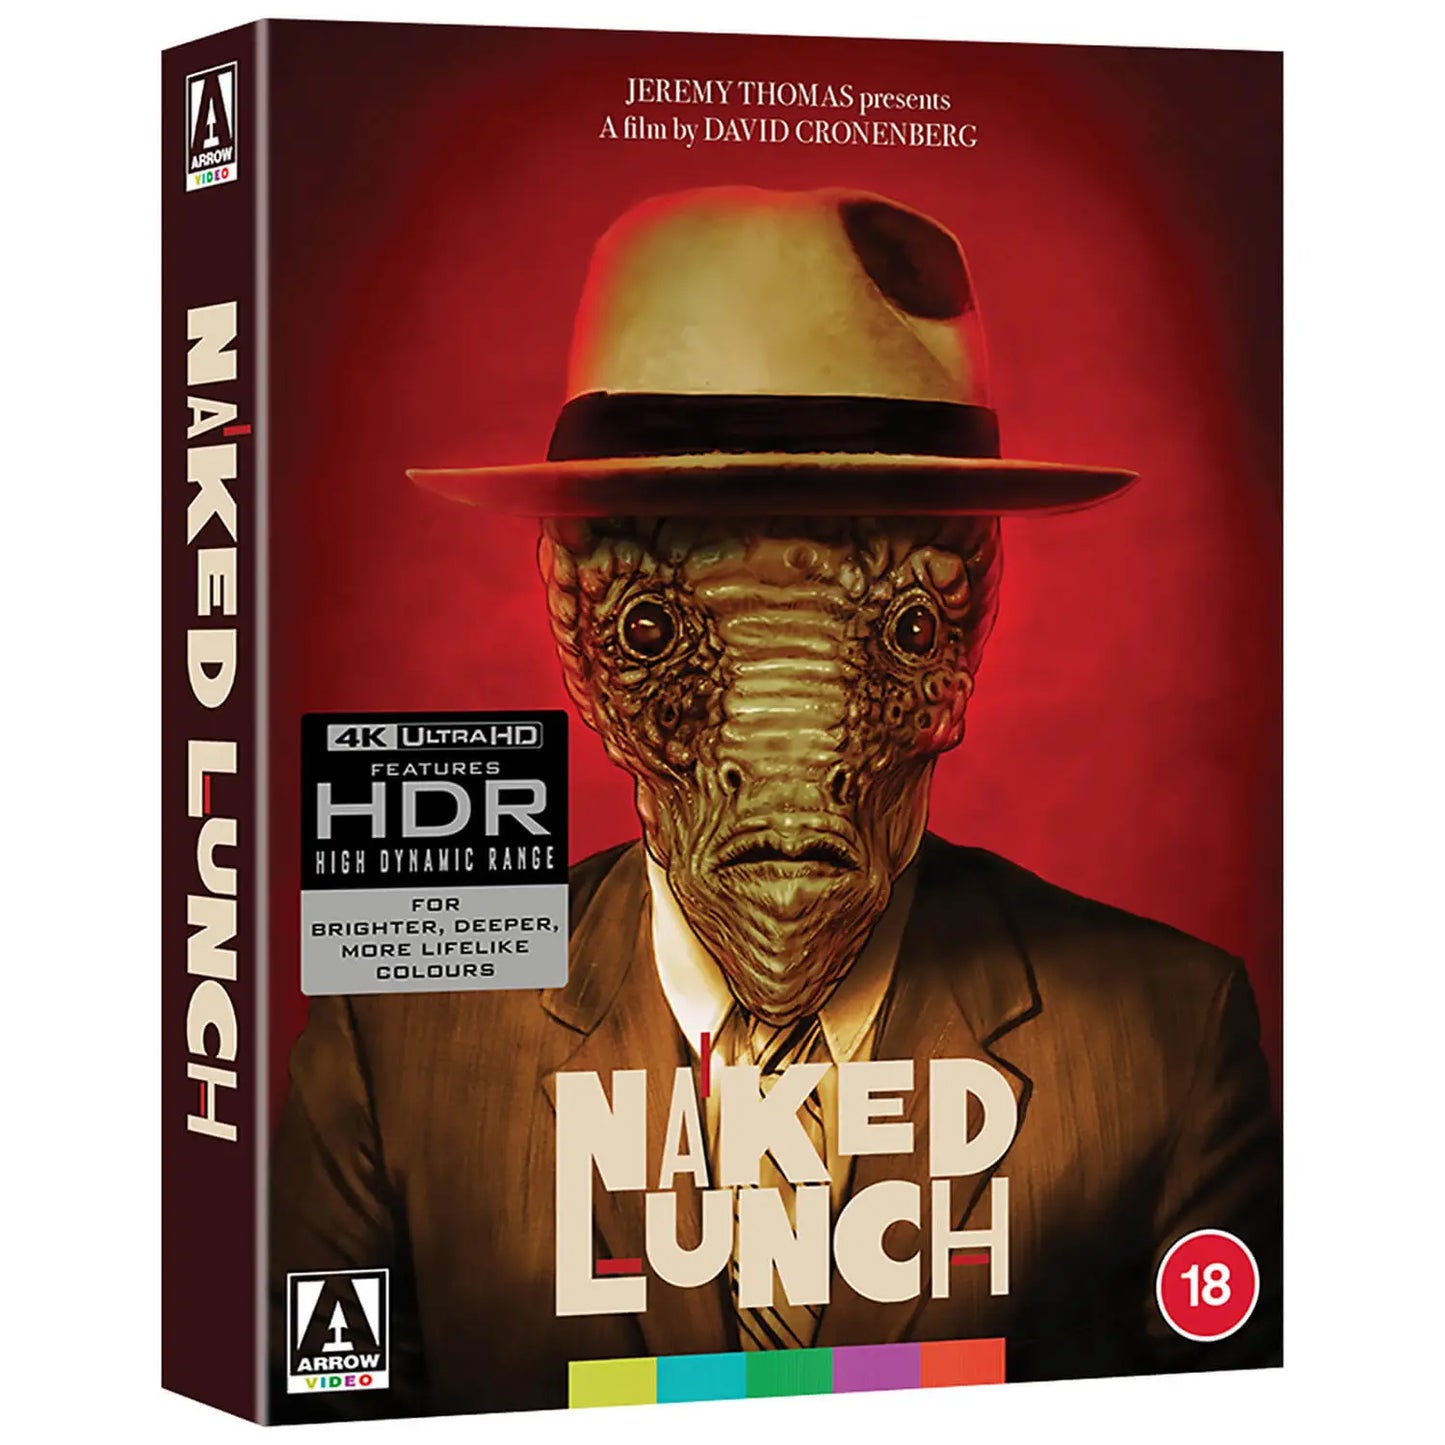 Naked Lunch 4K UHD with Slipcase (Arrow Video/Region Free)